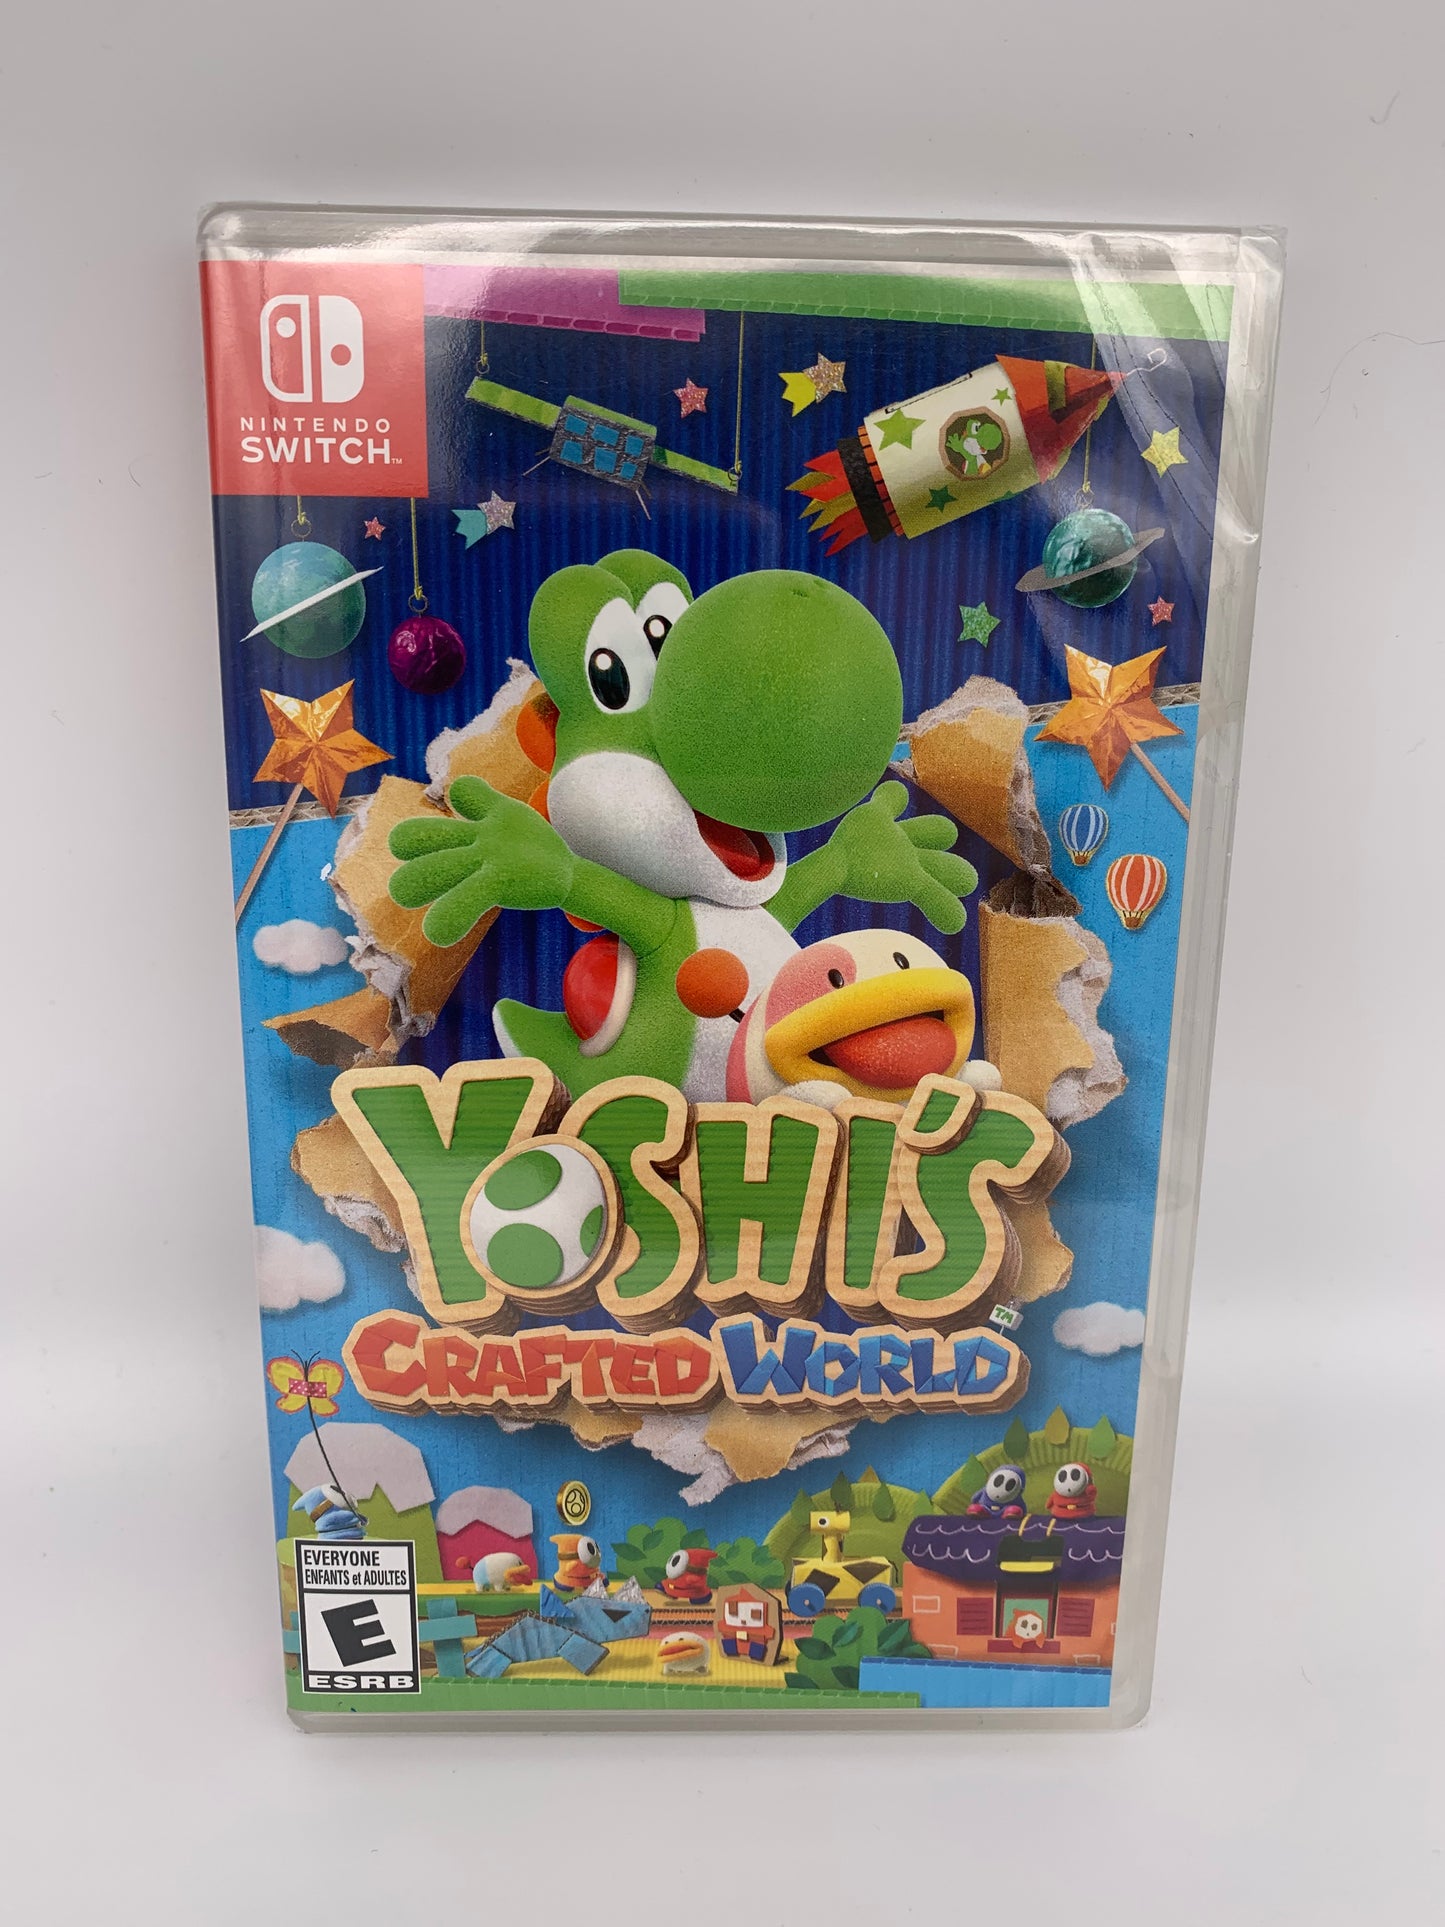 PiXEL-RETRO.COM : NINTENDO SWITCH NEW SEALED IN BOX COMPLETE MANUAL GAME NTSC YOSHI'S CRAFTED WORLD